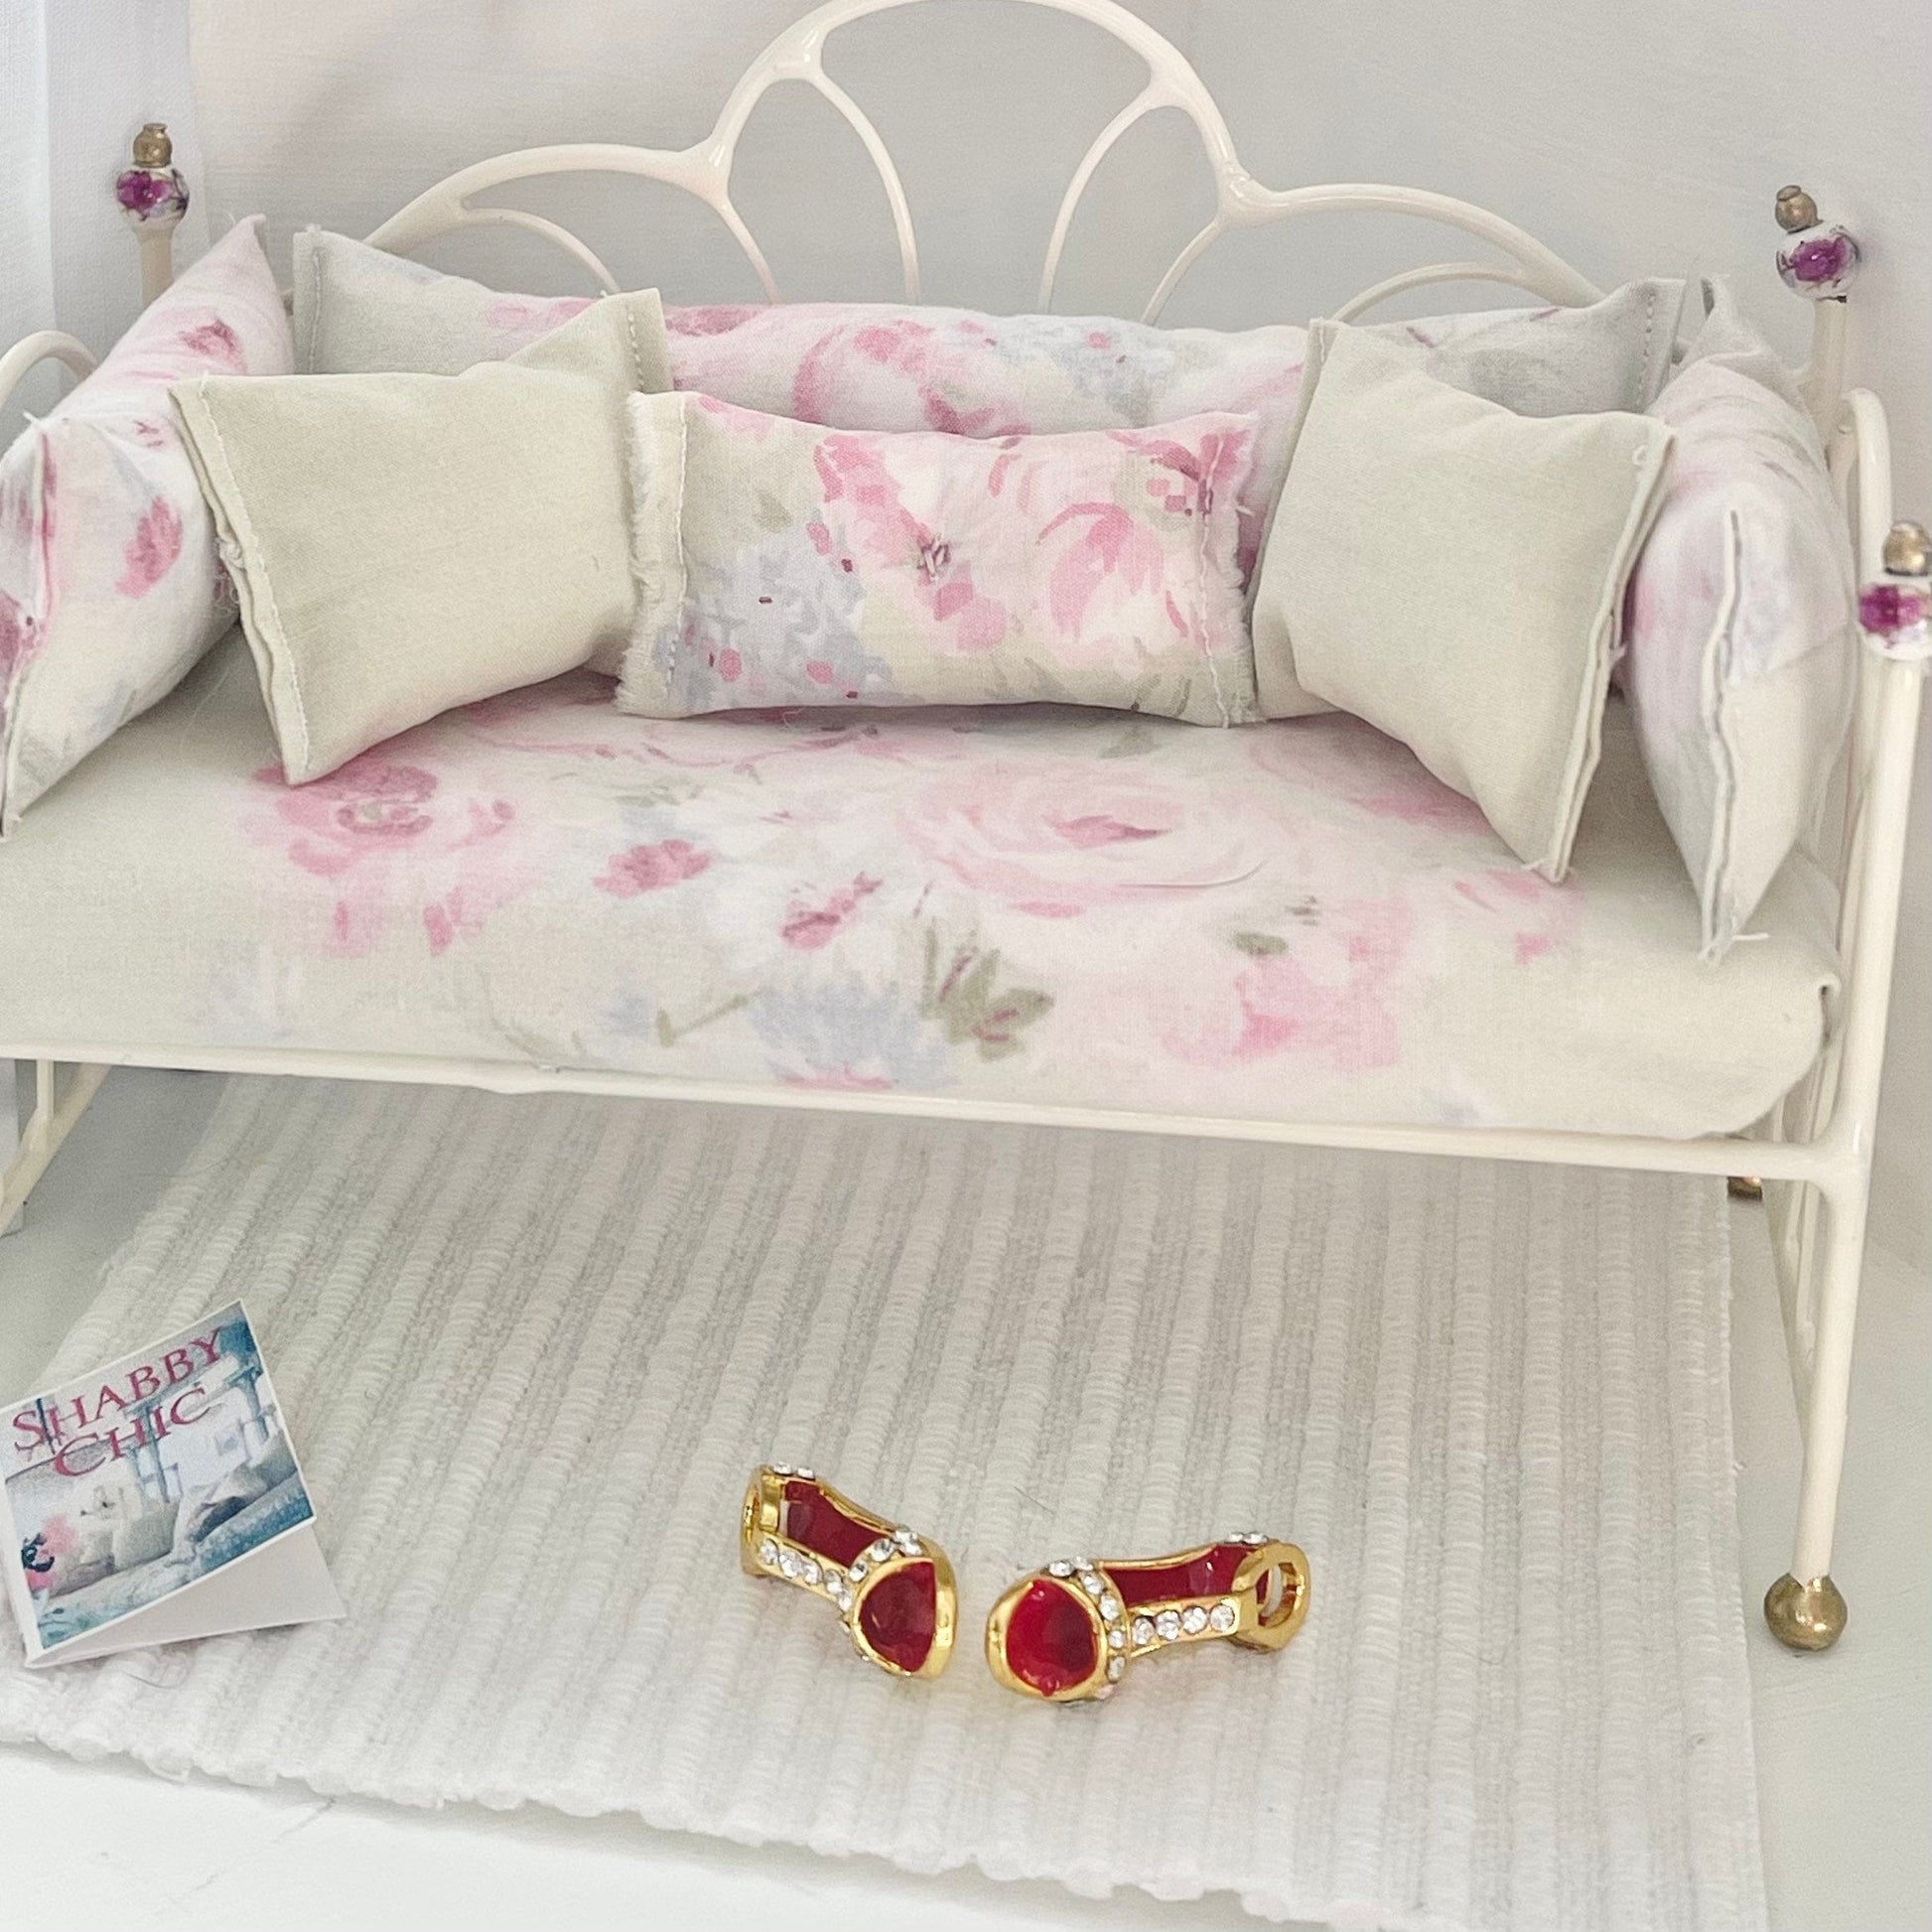 Chantallena Doll House Day Bed- Seven Piece Shabby Cotton Faded Green and Pink Roses Set with Mattress | Faded Shabby Green